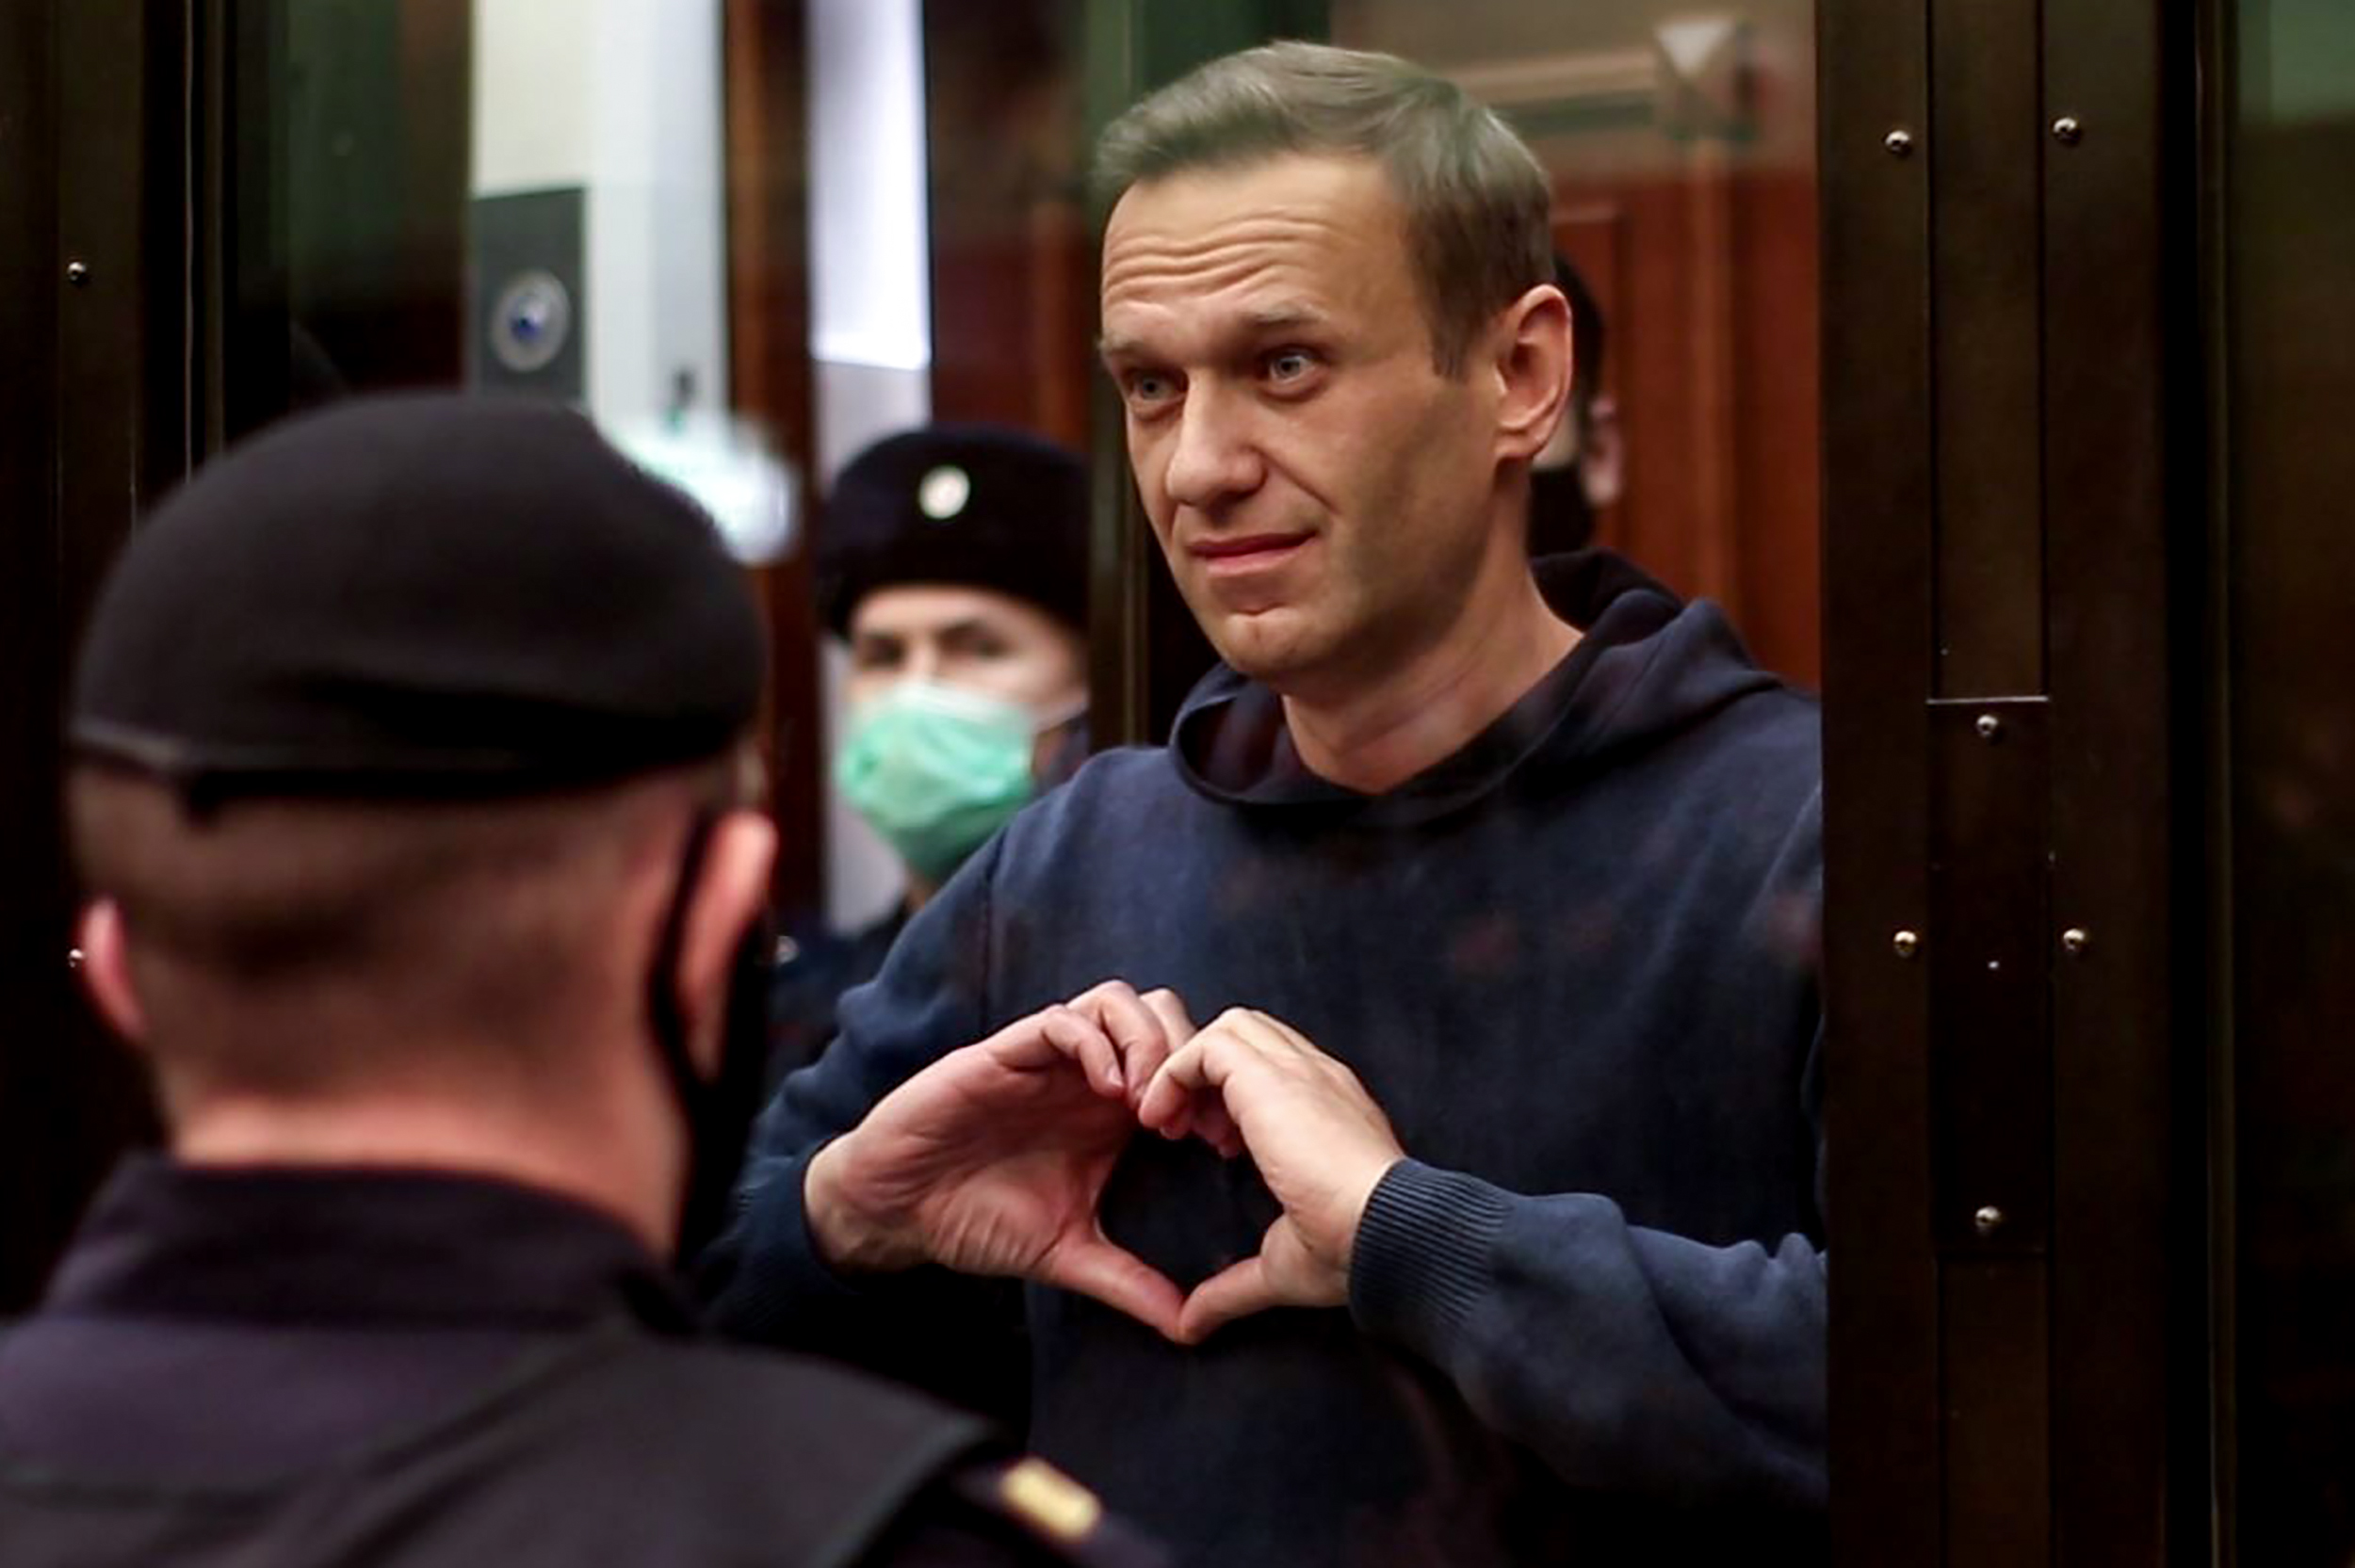 PHOTO: This screen grab from handout footage provided by the Moscow City Court press service shows Russian opposition leader Alexei Navalny, charged with violating the terms of a 2014 suspended sentence, during a hearing in Moscow on Feb. 2, 2021.